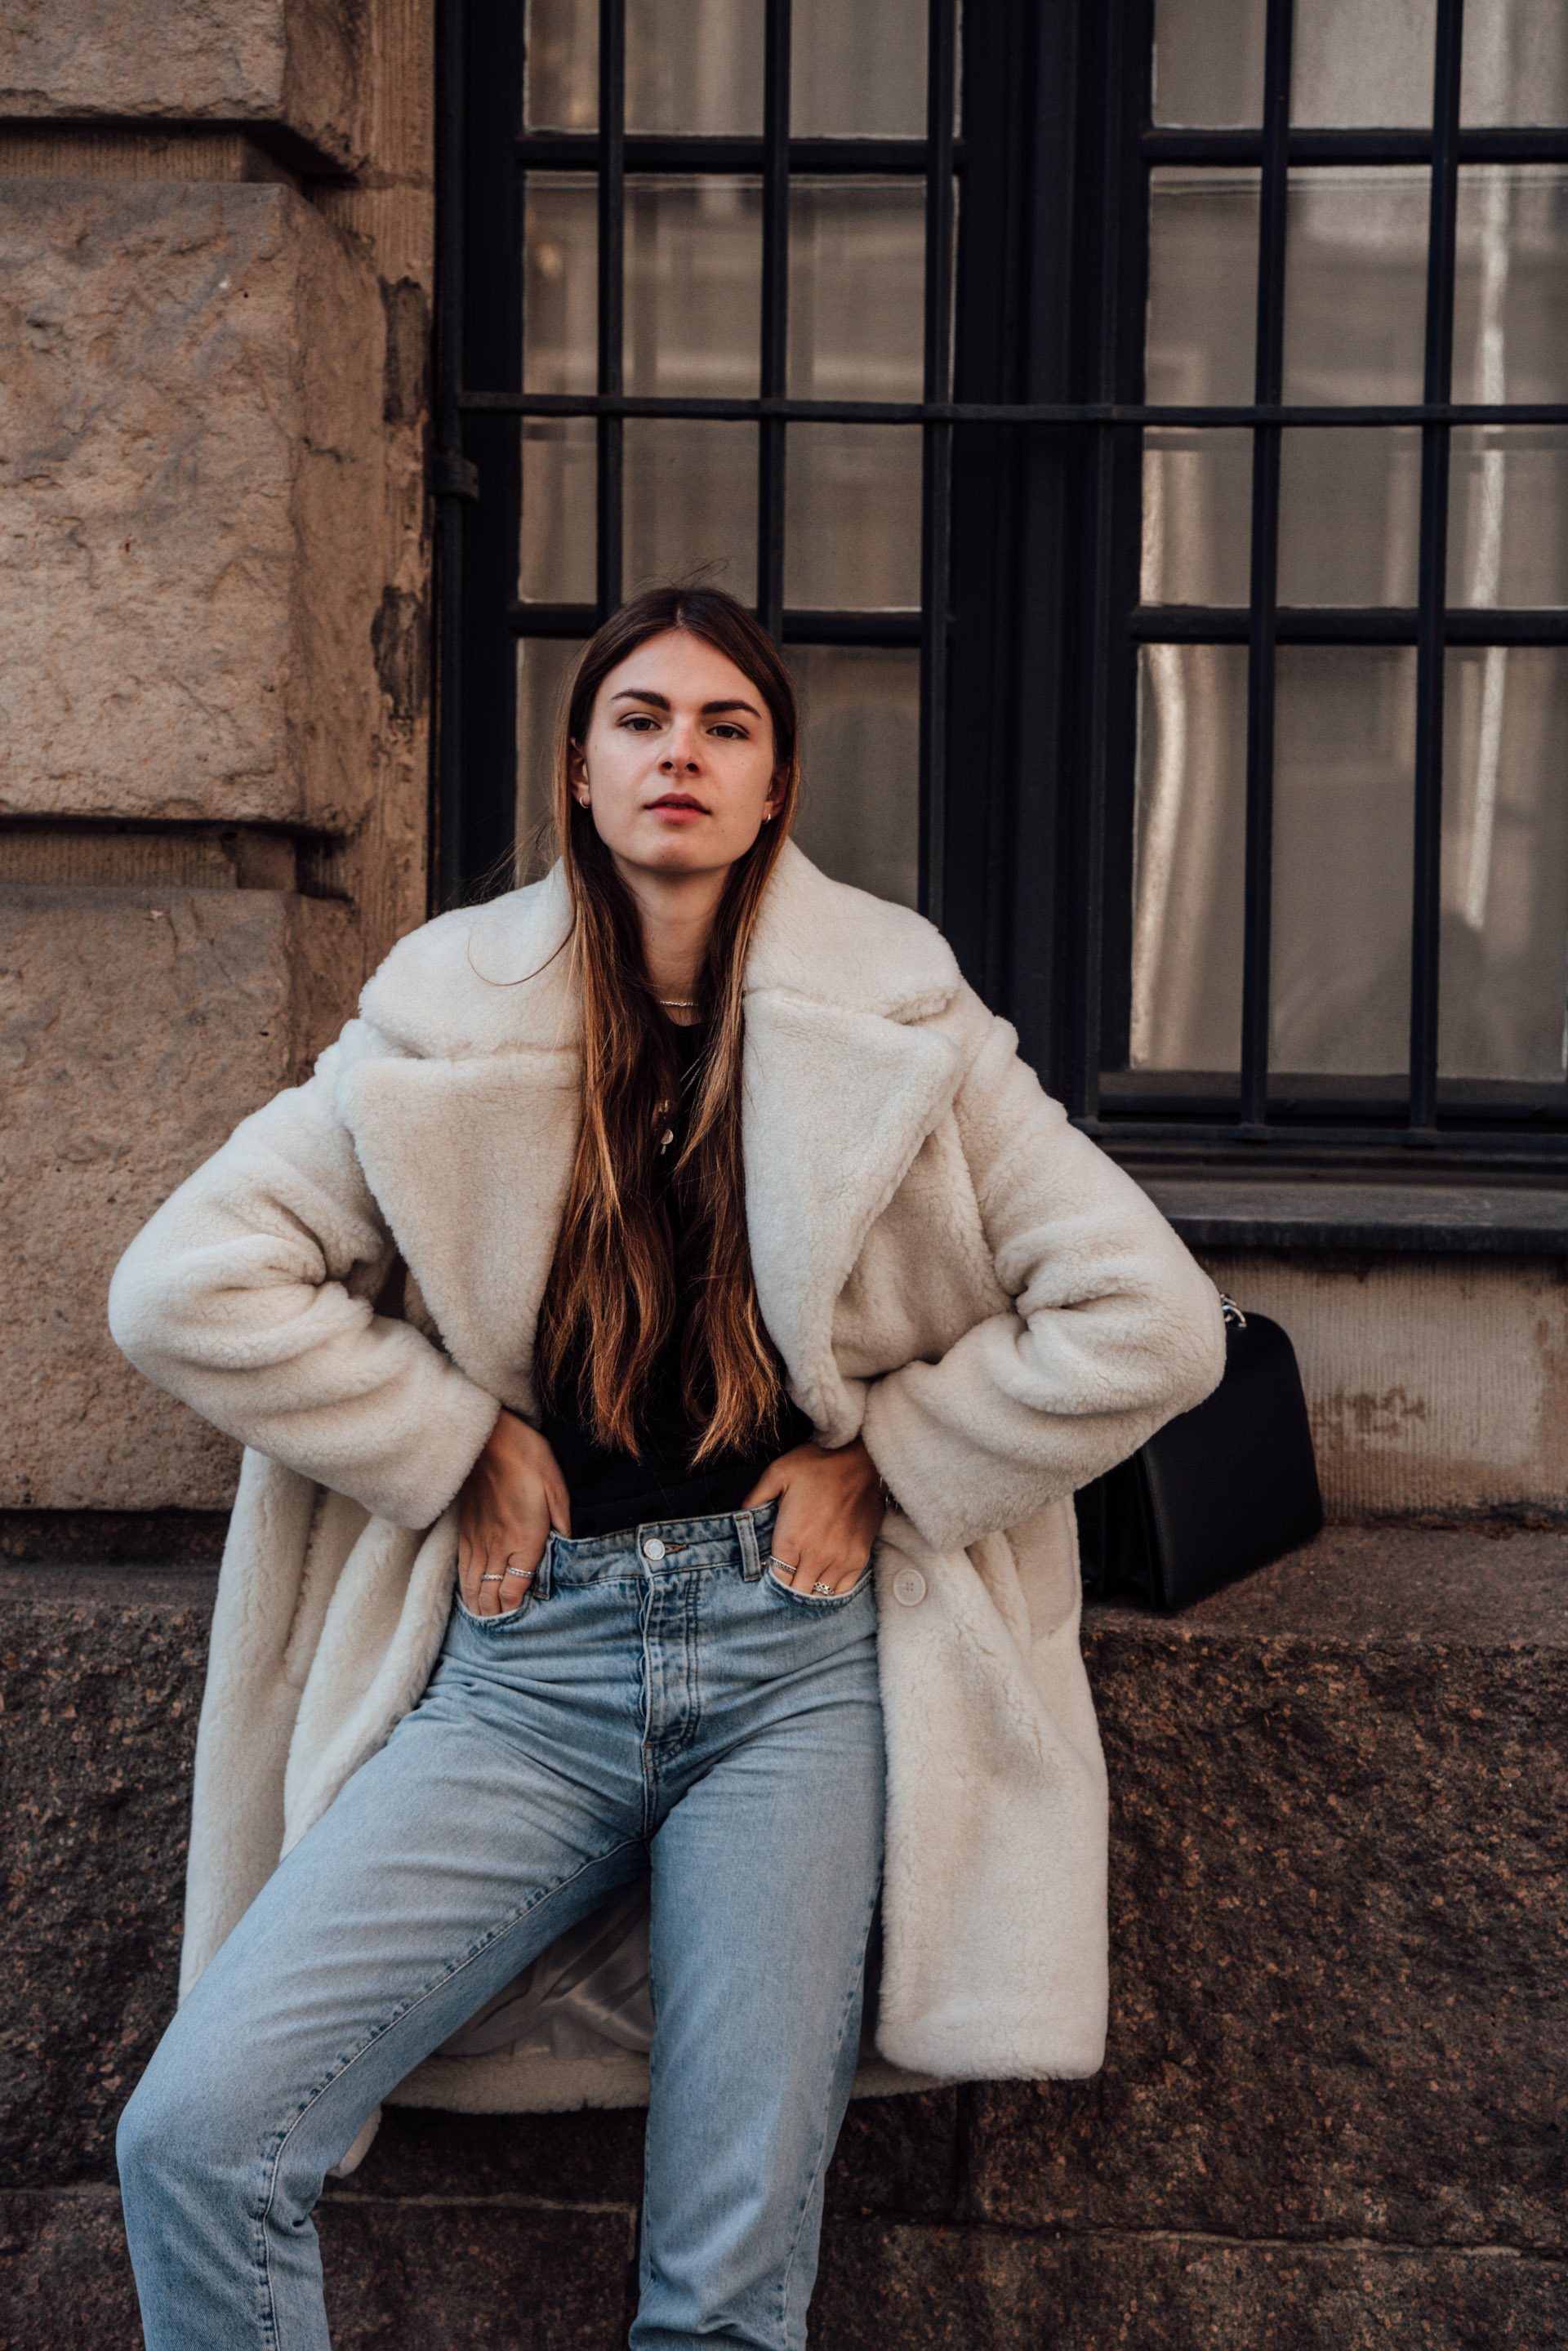 Winter Outfit with Teddy Coat and Ugly Sneakers || Fashionblog Berlin